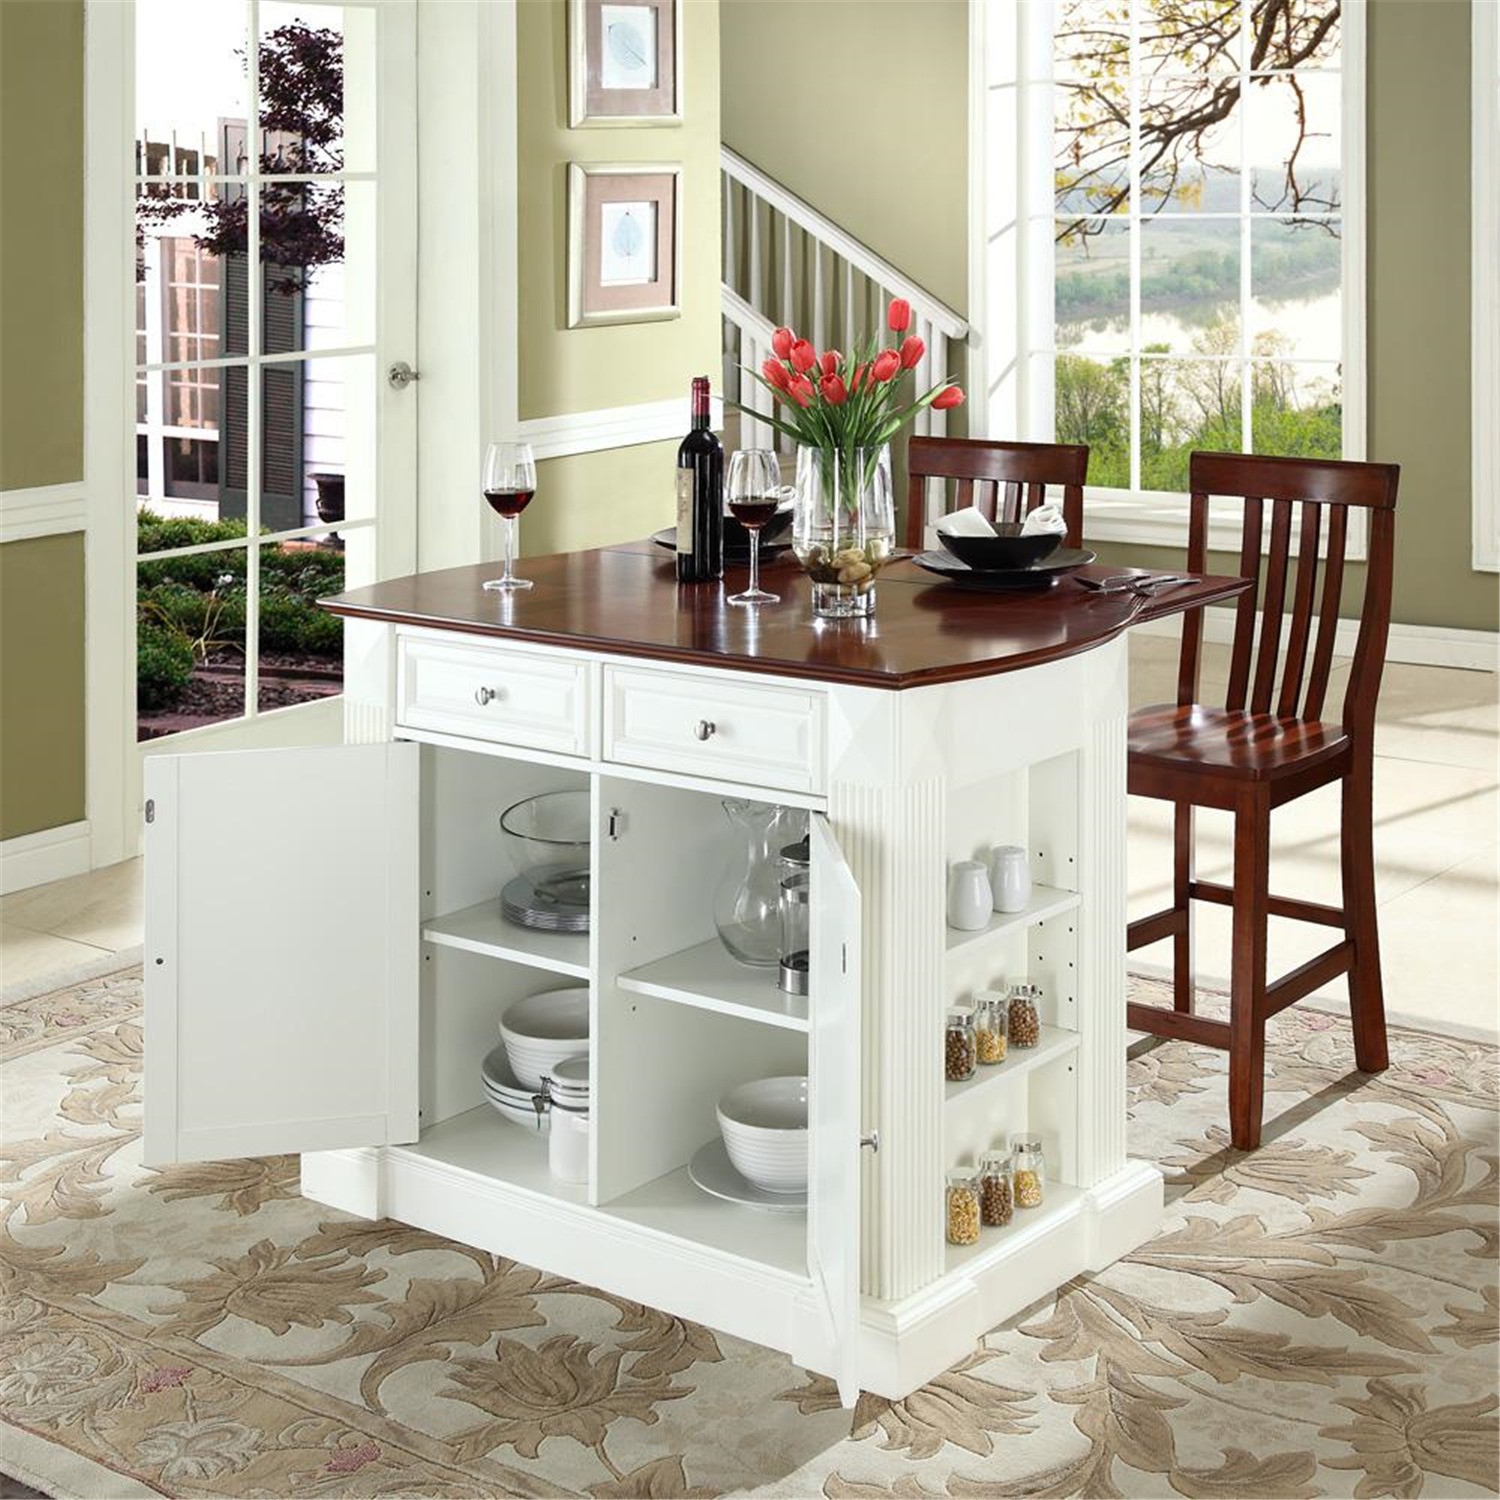 Portable Kitchen Islands With Breakfast Bar - Ideas on Foter